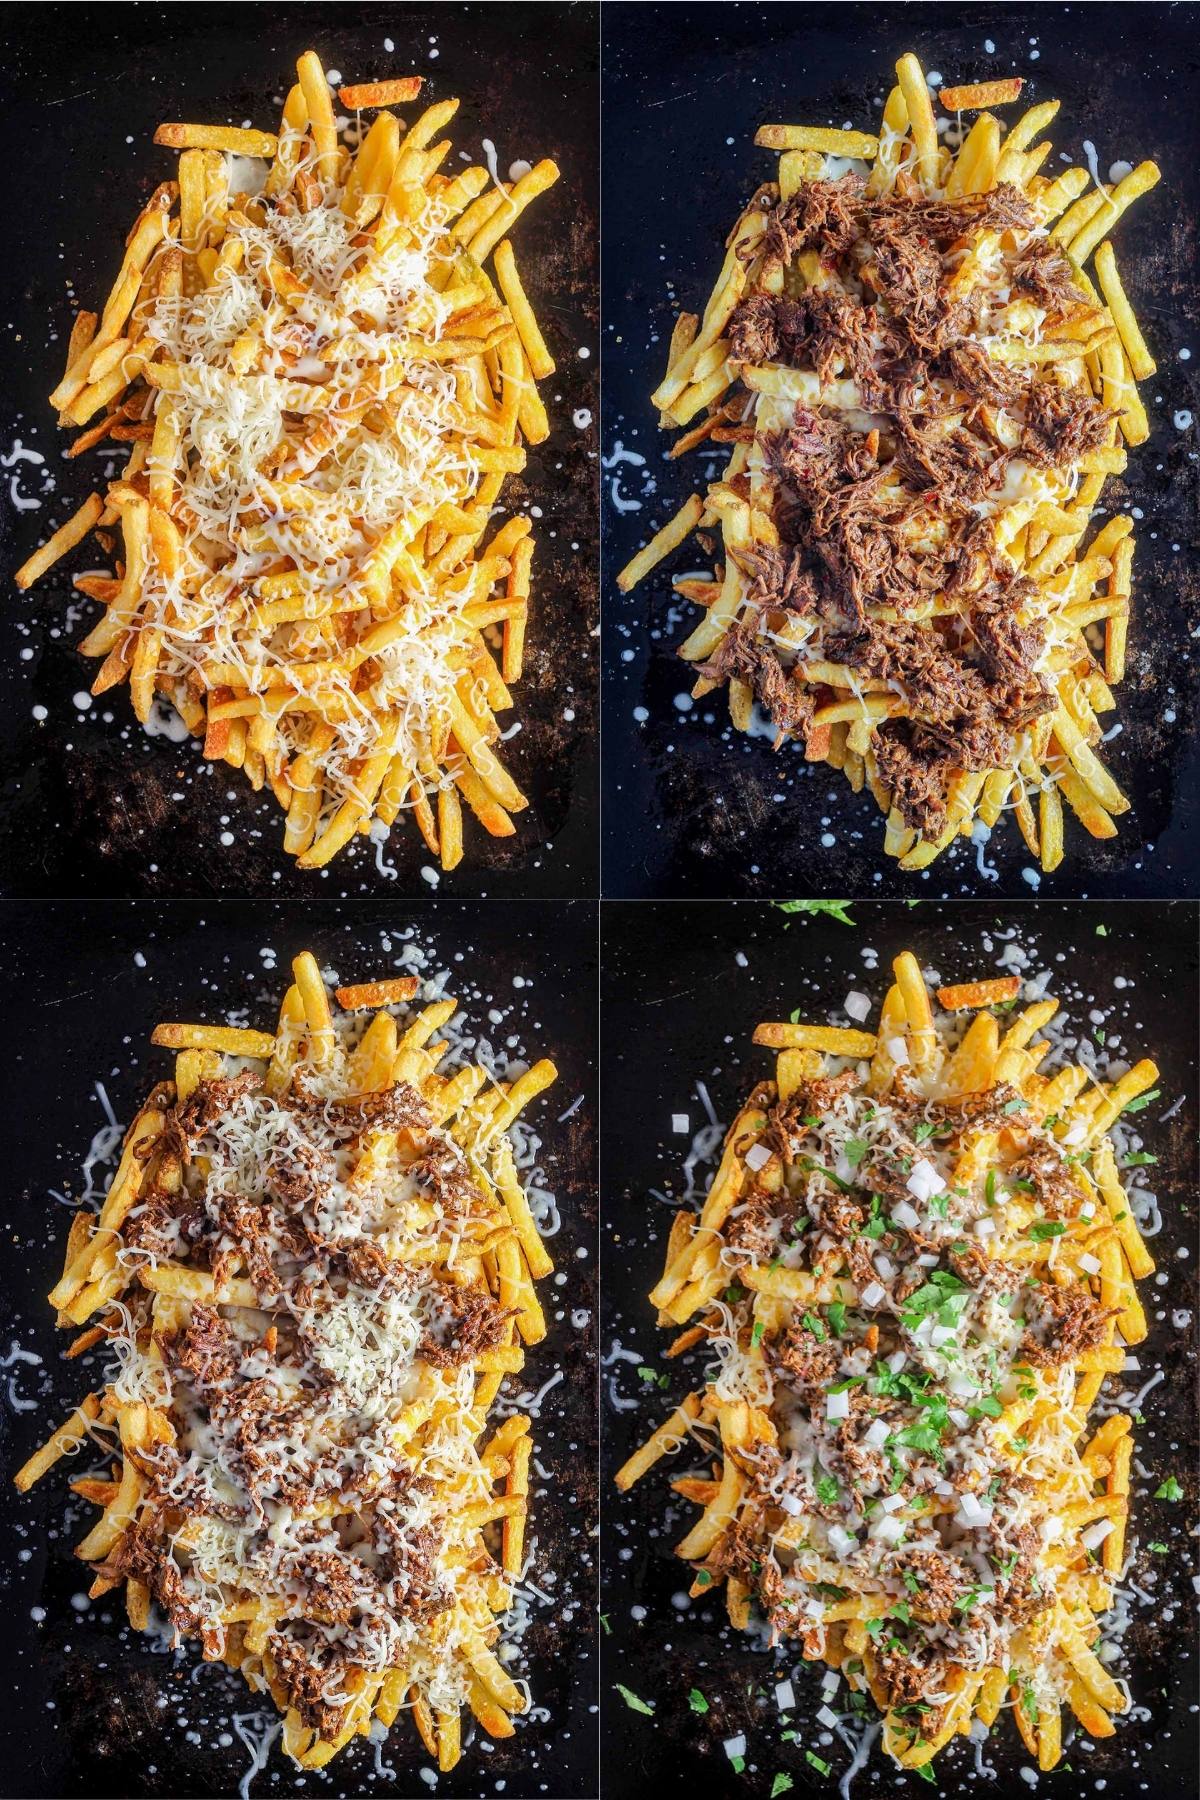 Assembly of birria fries in four stages: with cheese, with birria, more cheese, and topped with onion and cilantro.